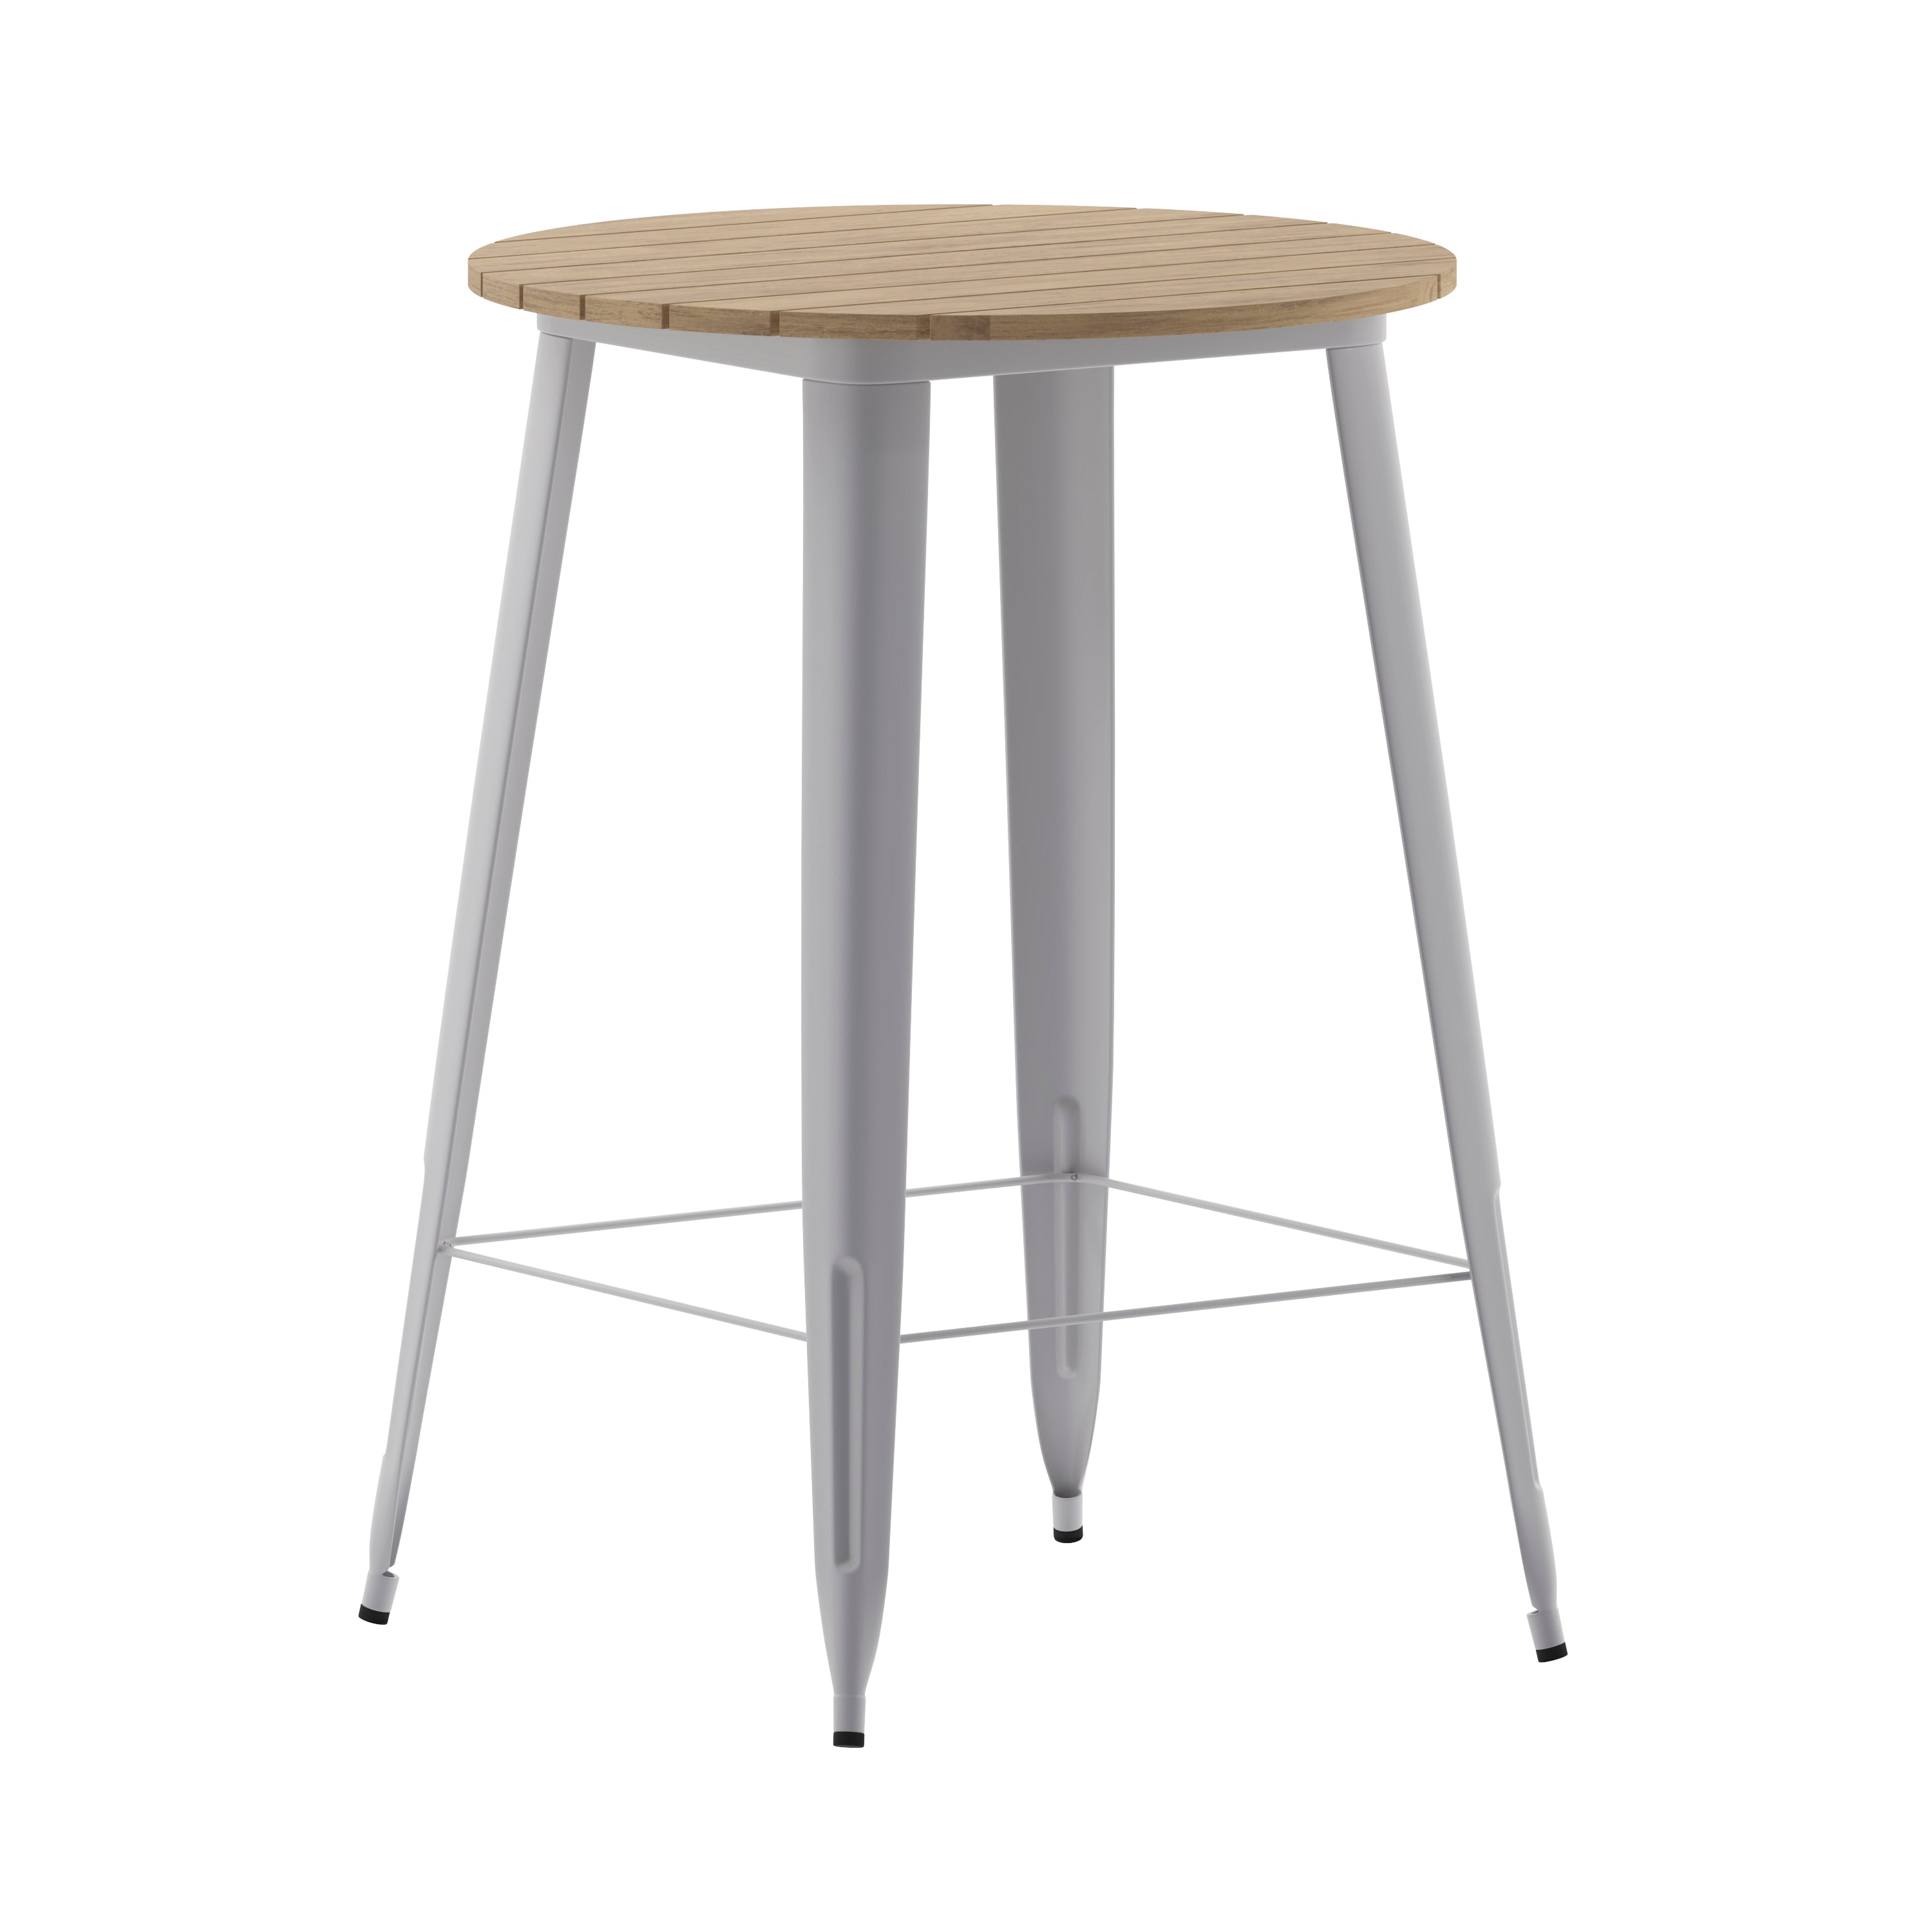 Declan Commercial Indoor/Outdoor Bar Top Table, 30" Round All Weather Poly Resin Top with Steel base-Metal Colorful Restaurant Bar Table-Flash Furniture-Wall2Wall Furnishings